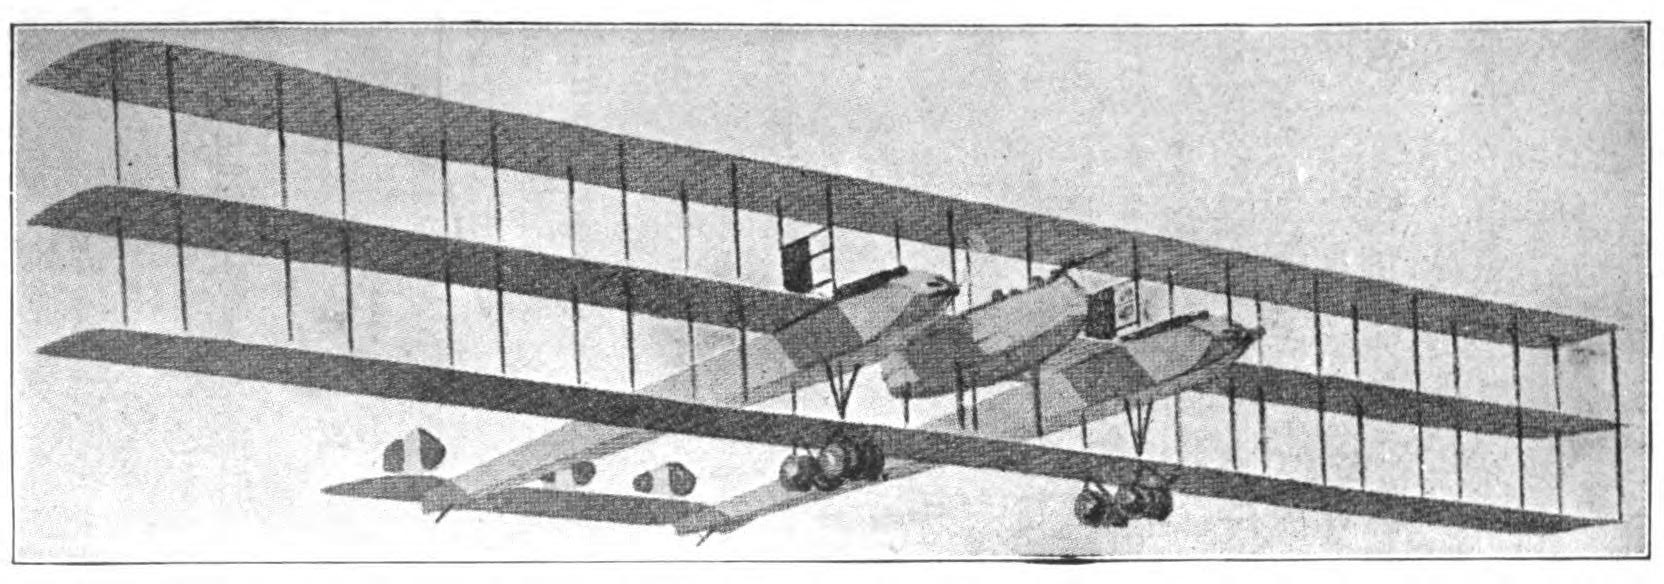 Fig. 11. Caproni Triplane with Three Independent Power Plants.